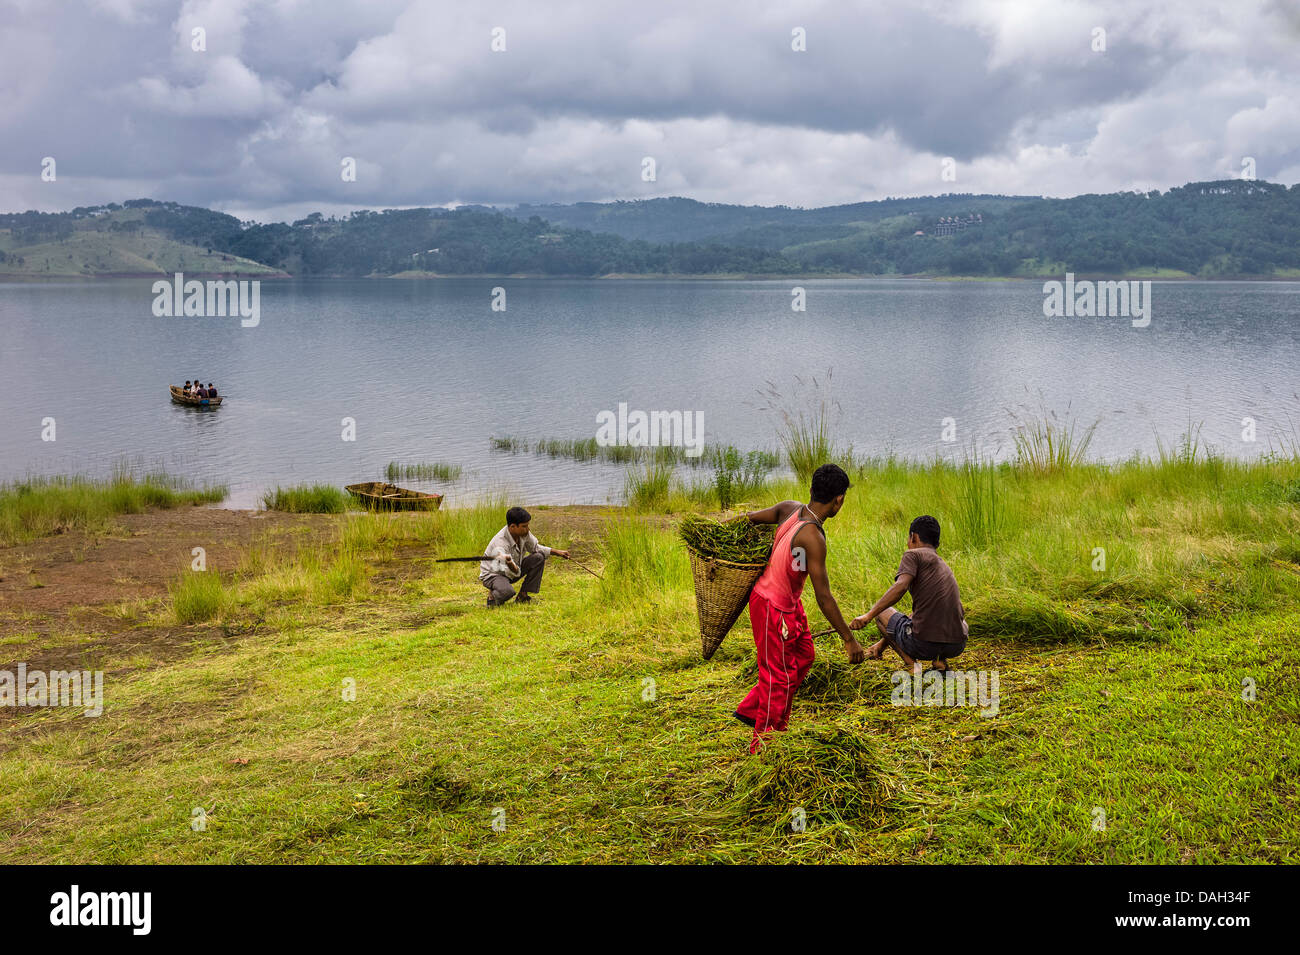 Municipal workers cut grass with machetes as wooden boat crosses Umiam lake with Khasi hills as backdrop in Shillong, Meghalaya. Stock Photo